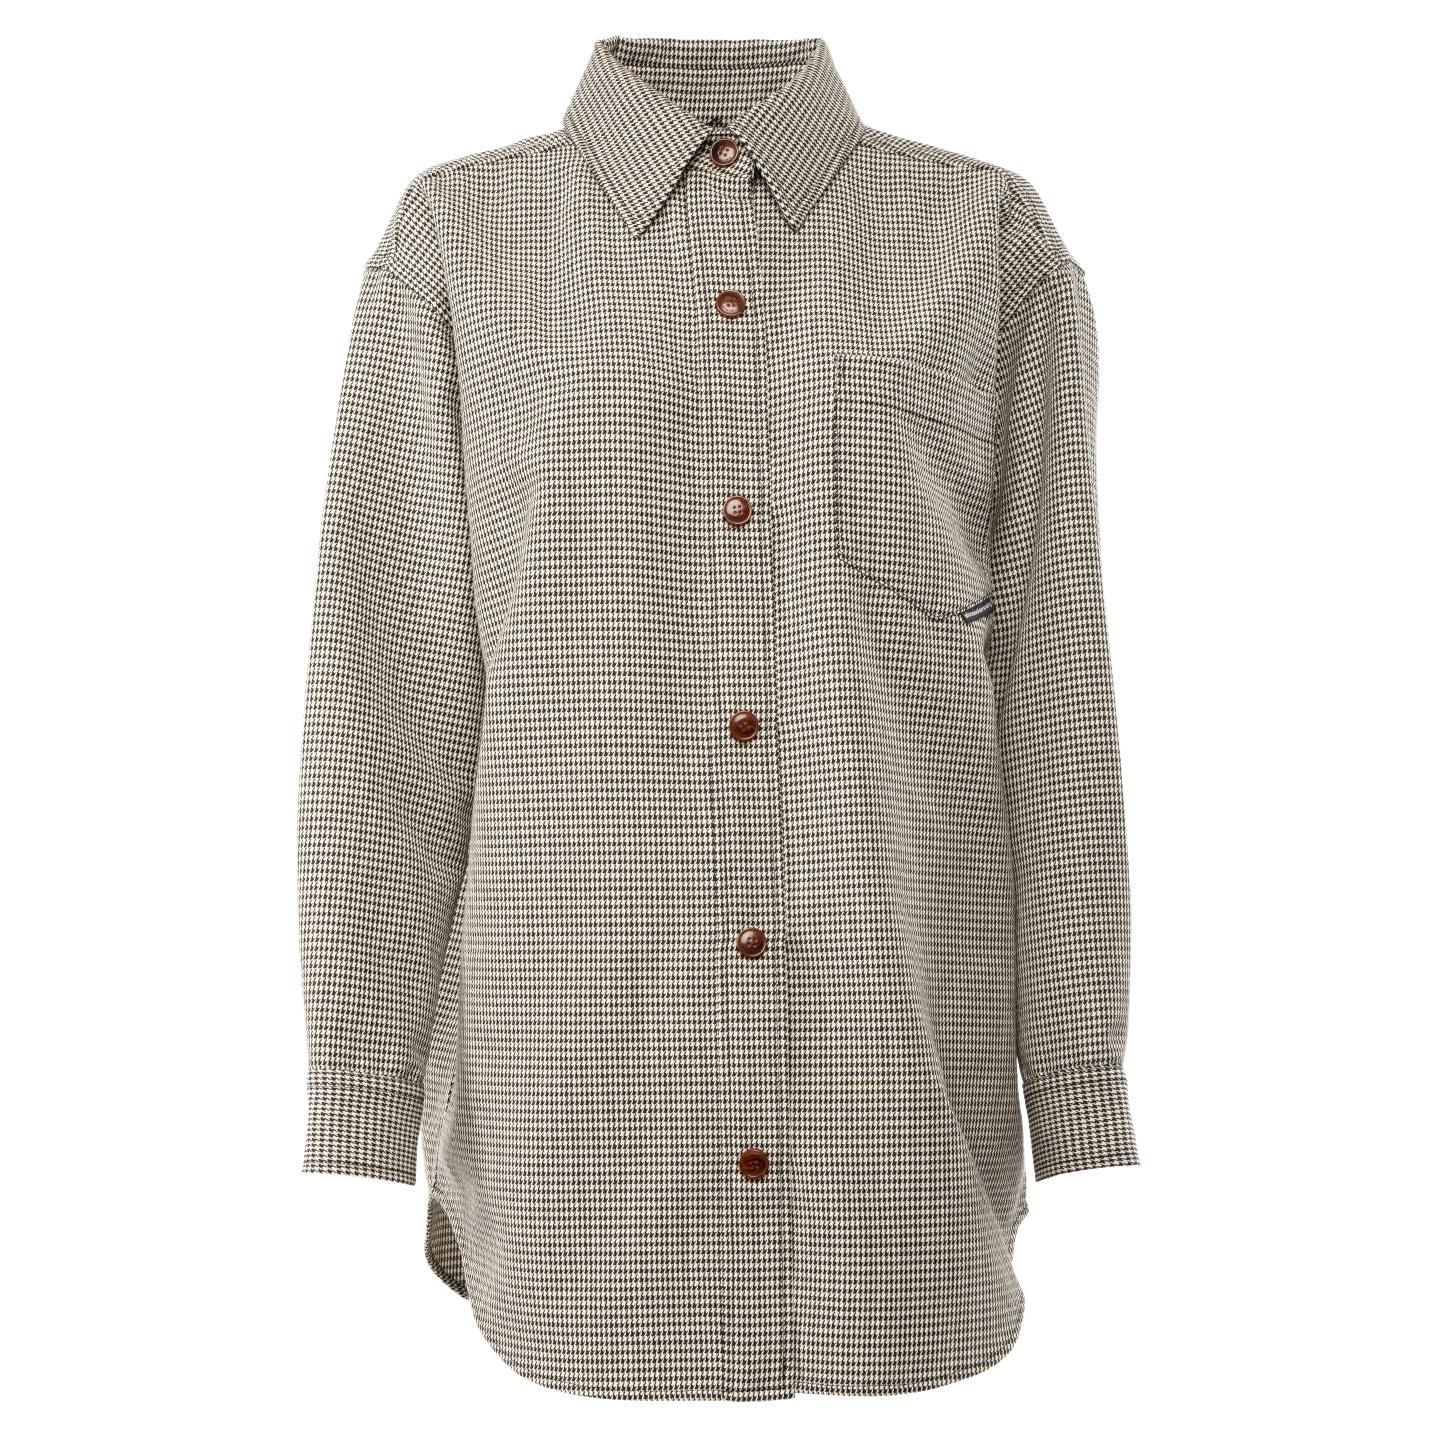 Pre-Loved Alexander Wang Women's Houndstooth Shirt Jacket For Sale